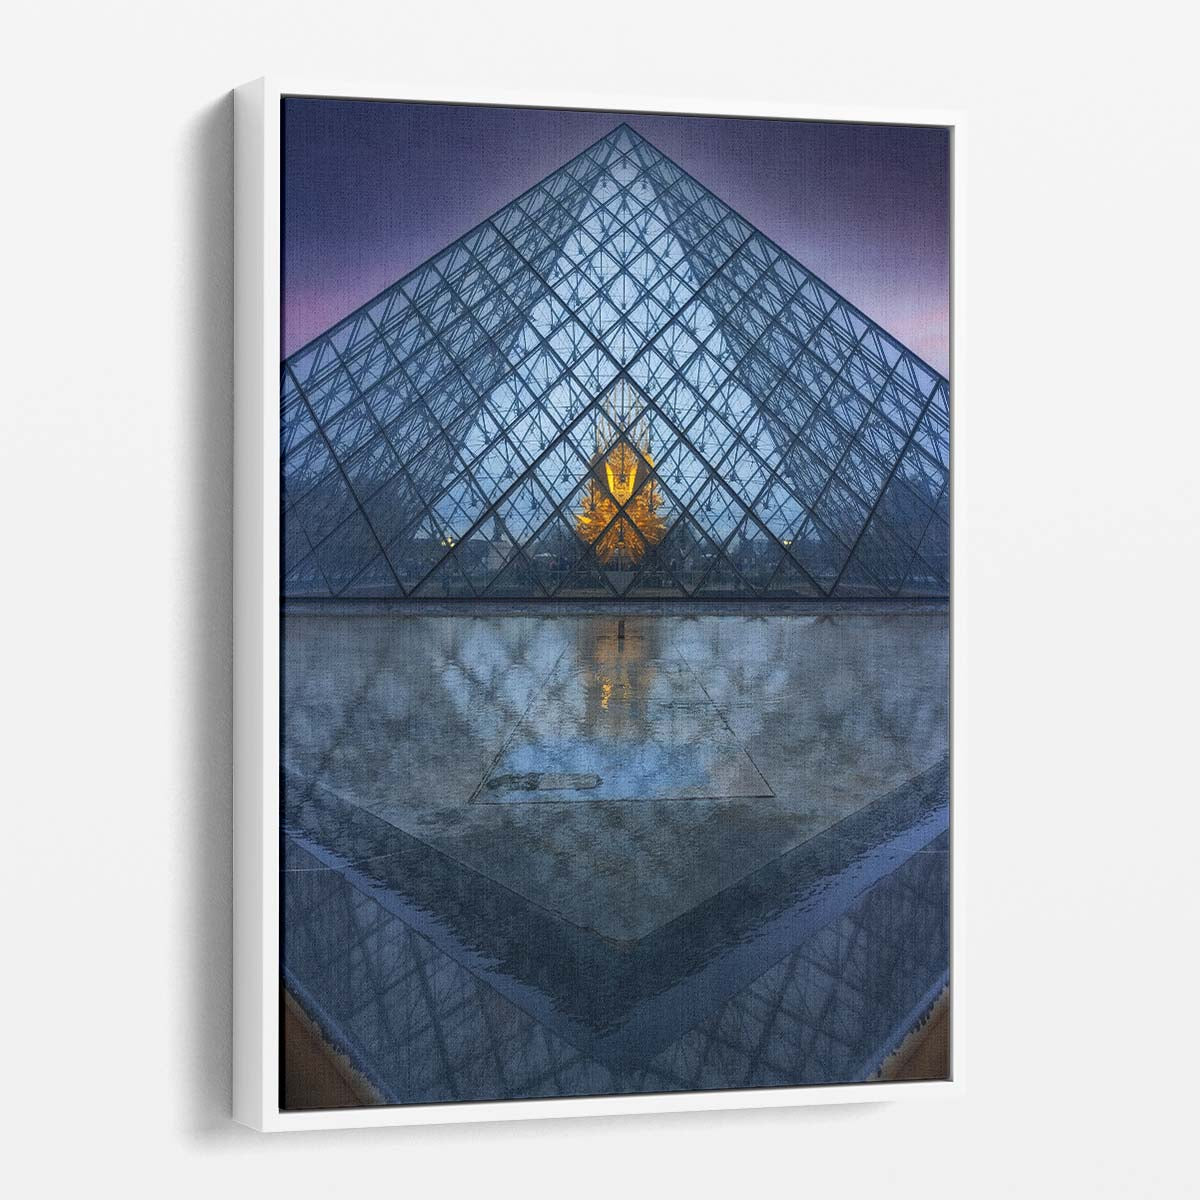 Iconic Louvre Pyramid Paris Photography Abstract Geometric Travel Artwork by Luxuriance Designs, made in USA